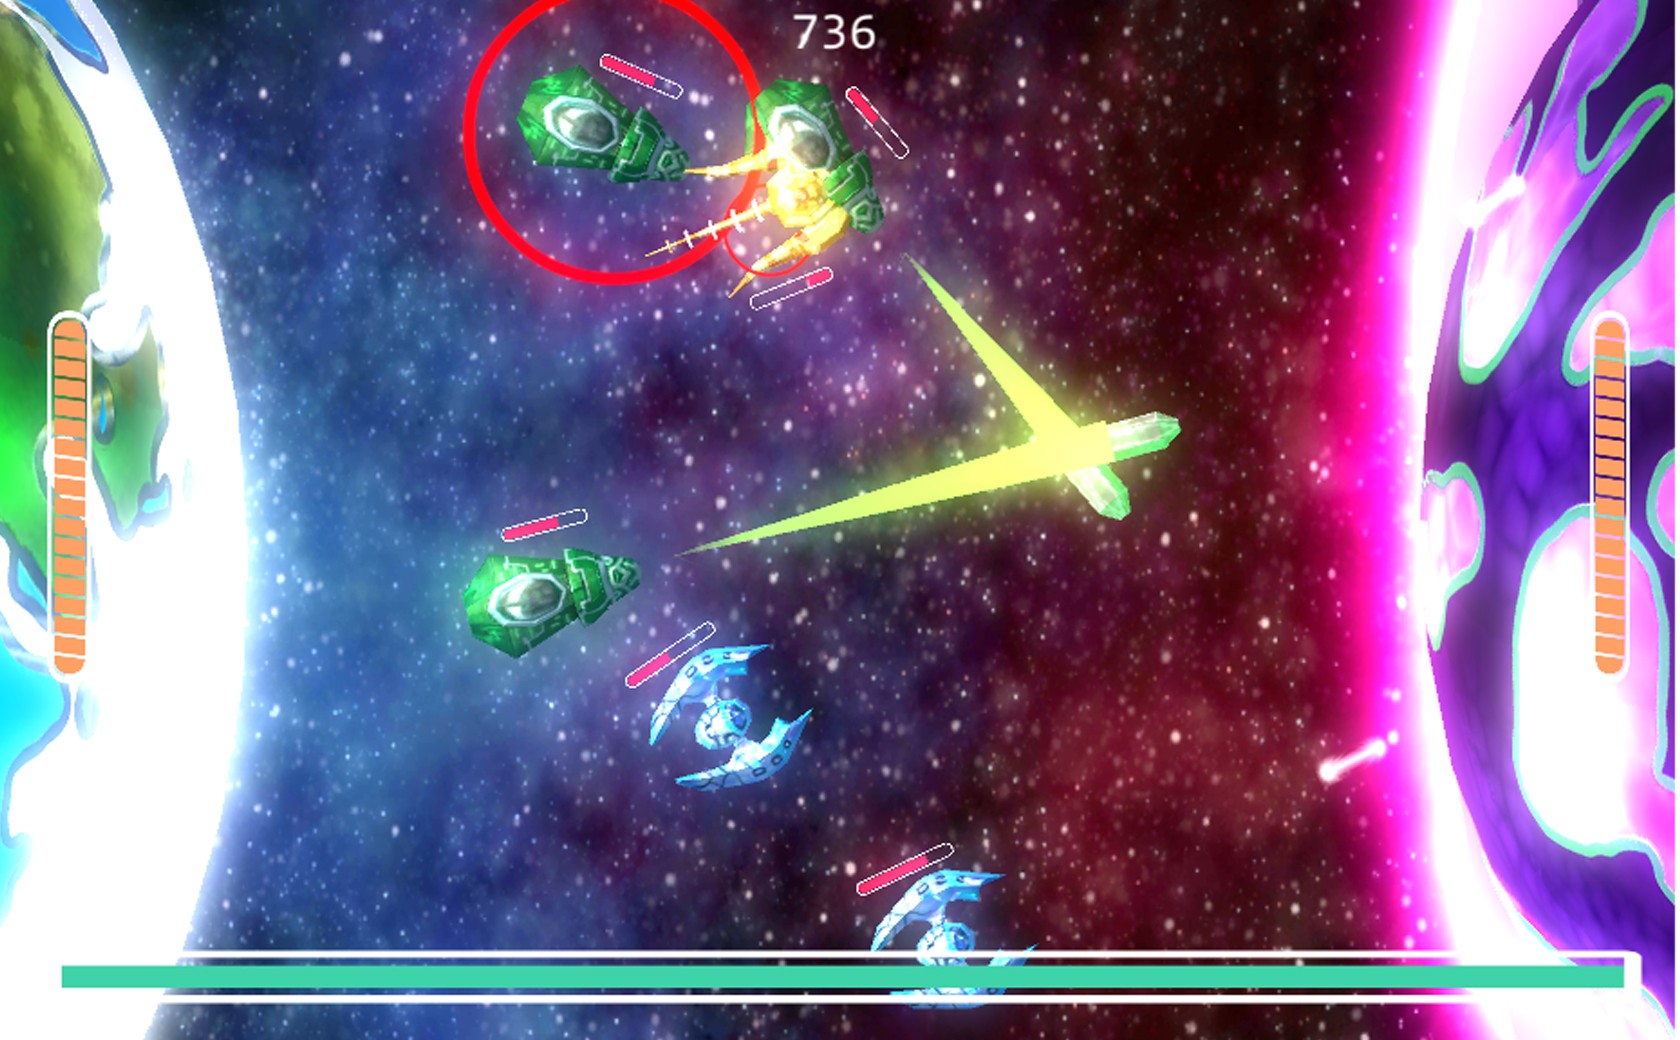 Alliance - Local coop space shooter game